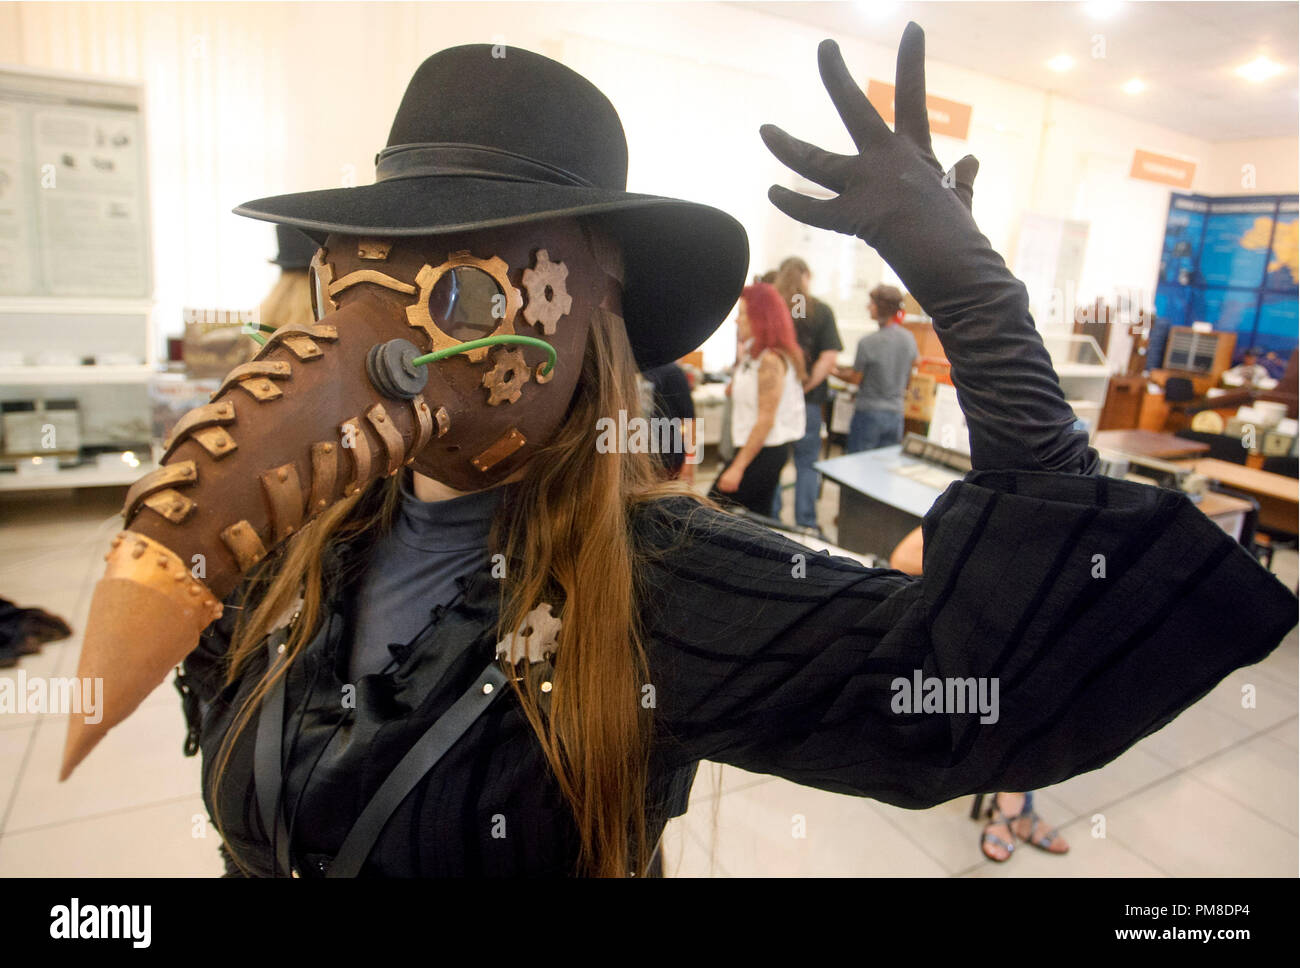 A woman wearing steampunk costumes is seen during 'VI KyivSteamCon' event in Kiev.The Steampunk festival involving workshops, talks, competitions, dances and lectures attracts fans of subgenre steampunk, cosplay and science fiction. Stock Photo